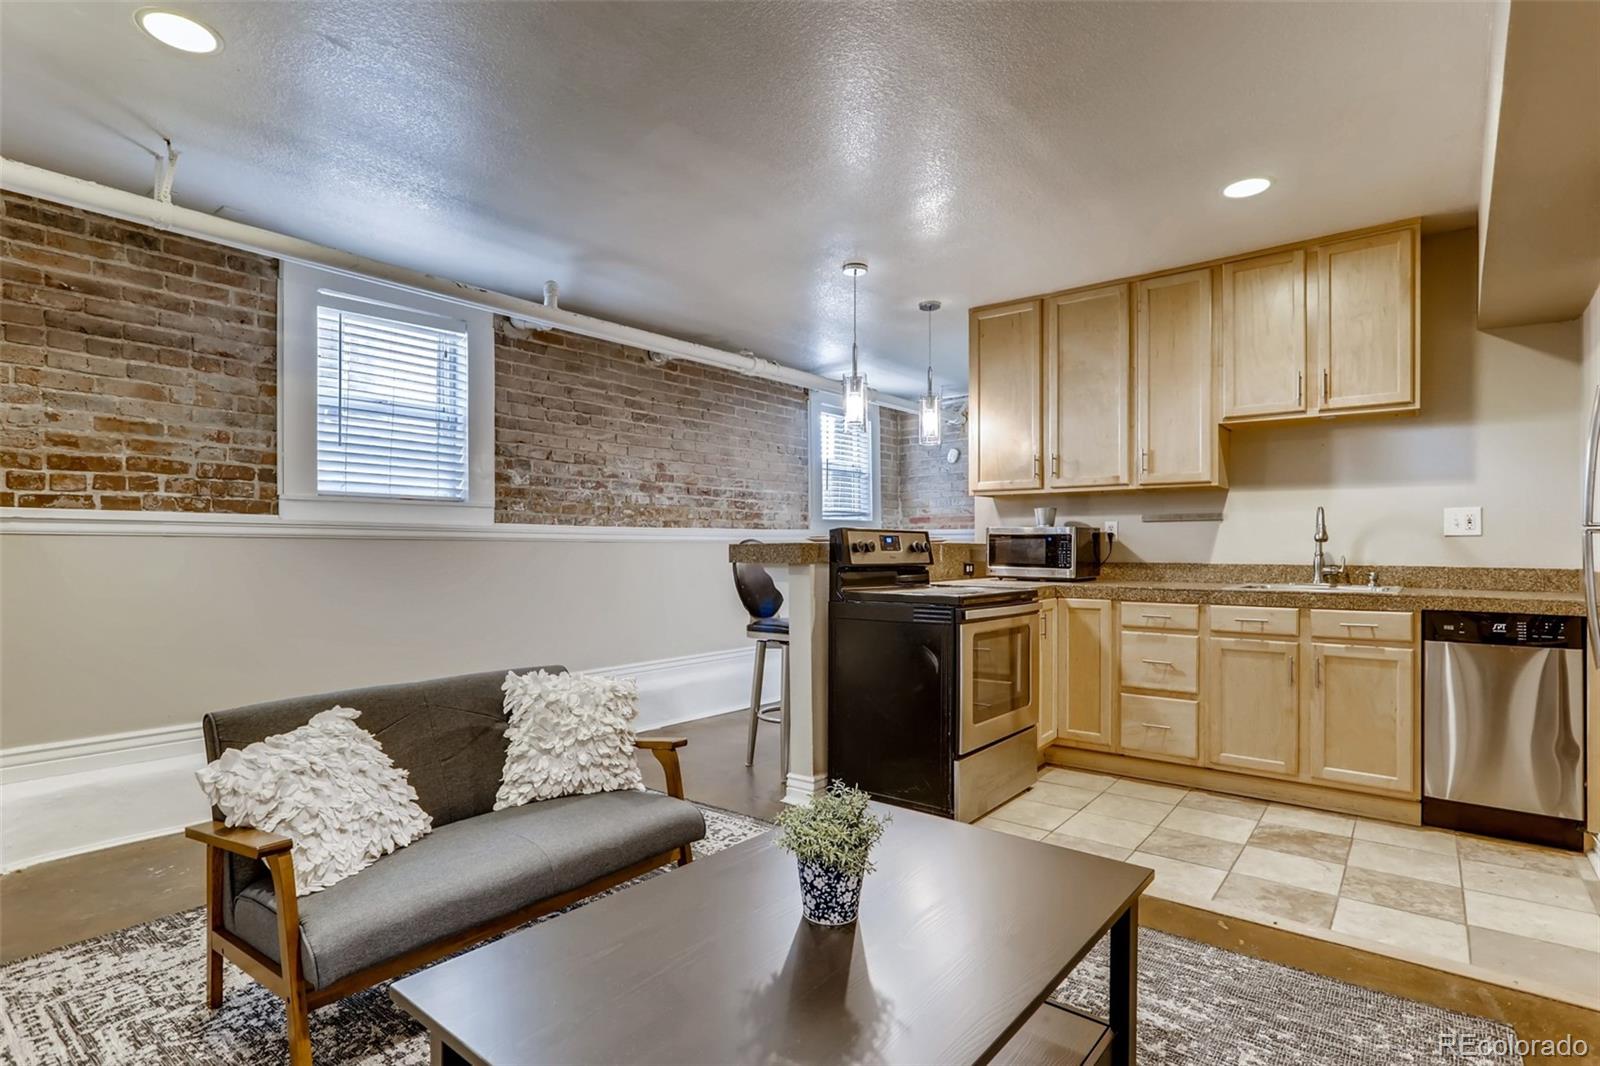 a kitchen with stainless steel appliances kitchen island granite countertop a refrigerator a stove a sink dishwasher with a dining table and chairs